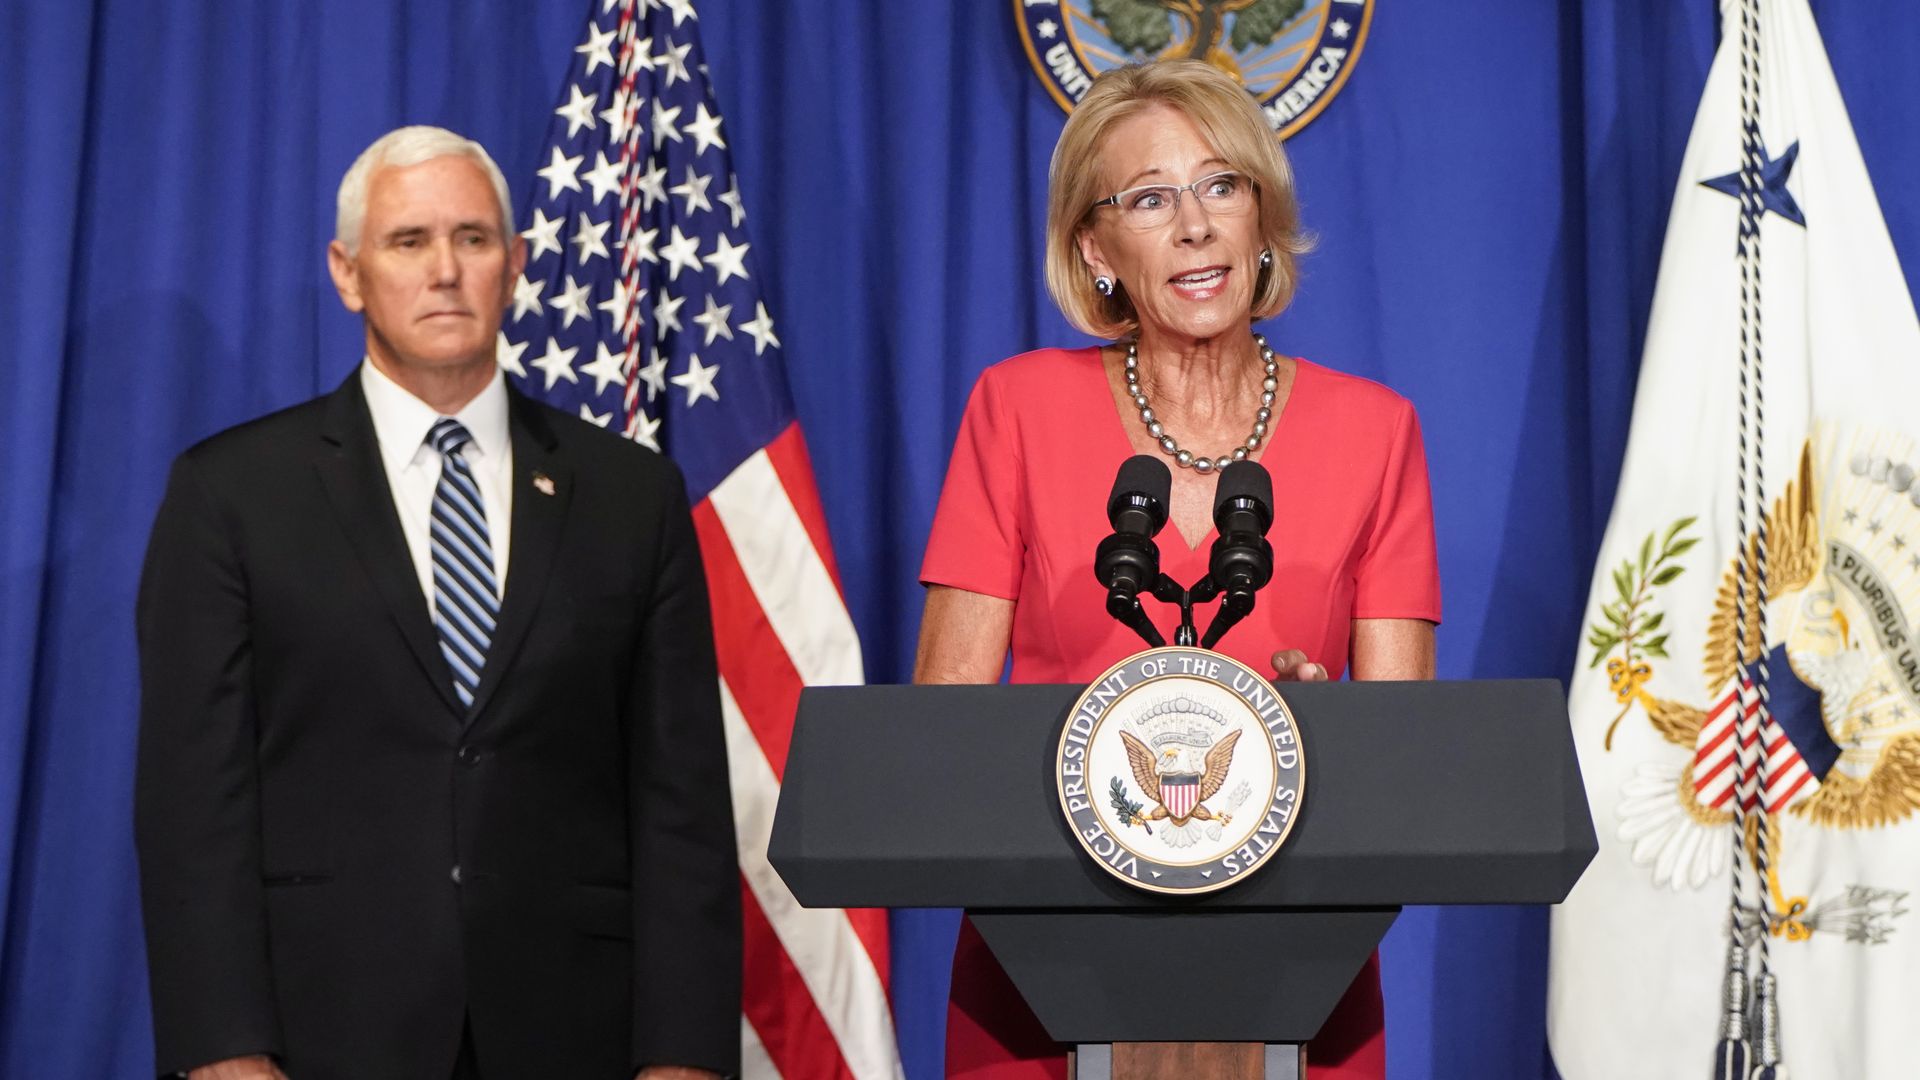 Betsy DeVos speaking at podium while Mike Pence looks on 